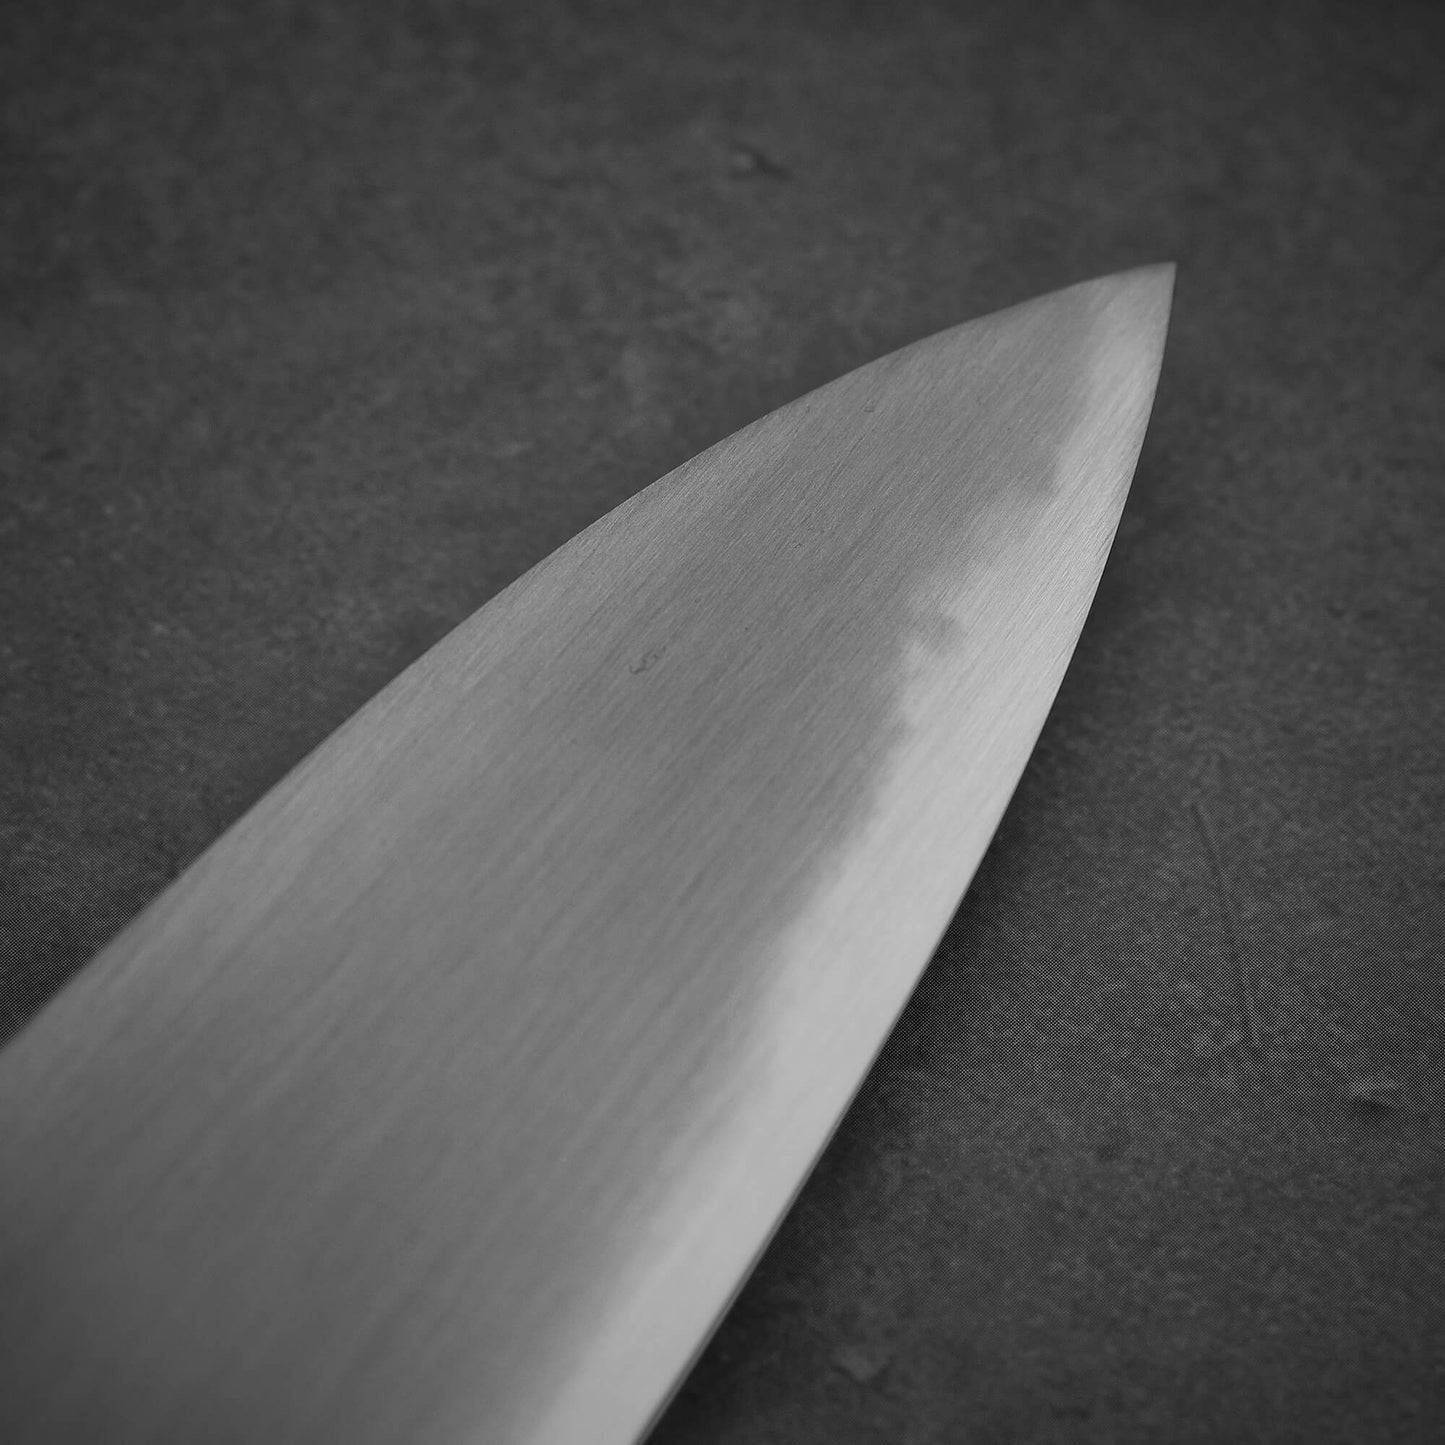 Close up view of the tip area of Nakagawa aogami#2 gyuto